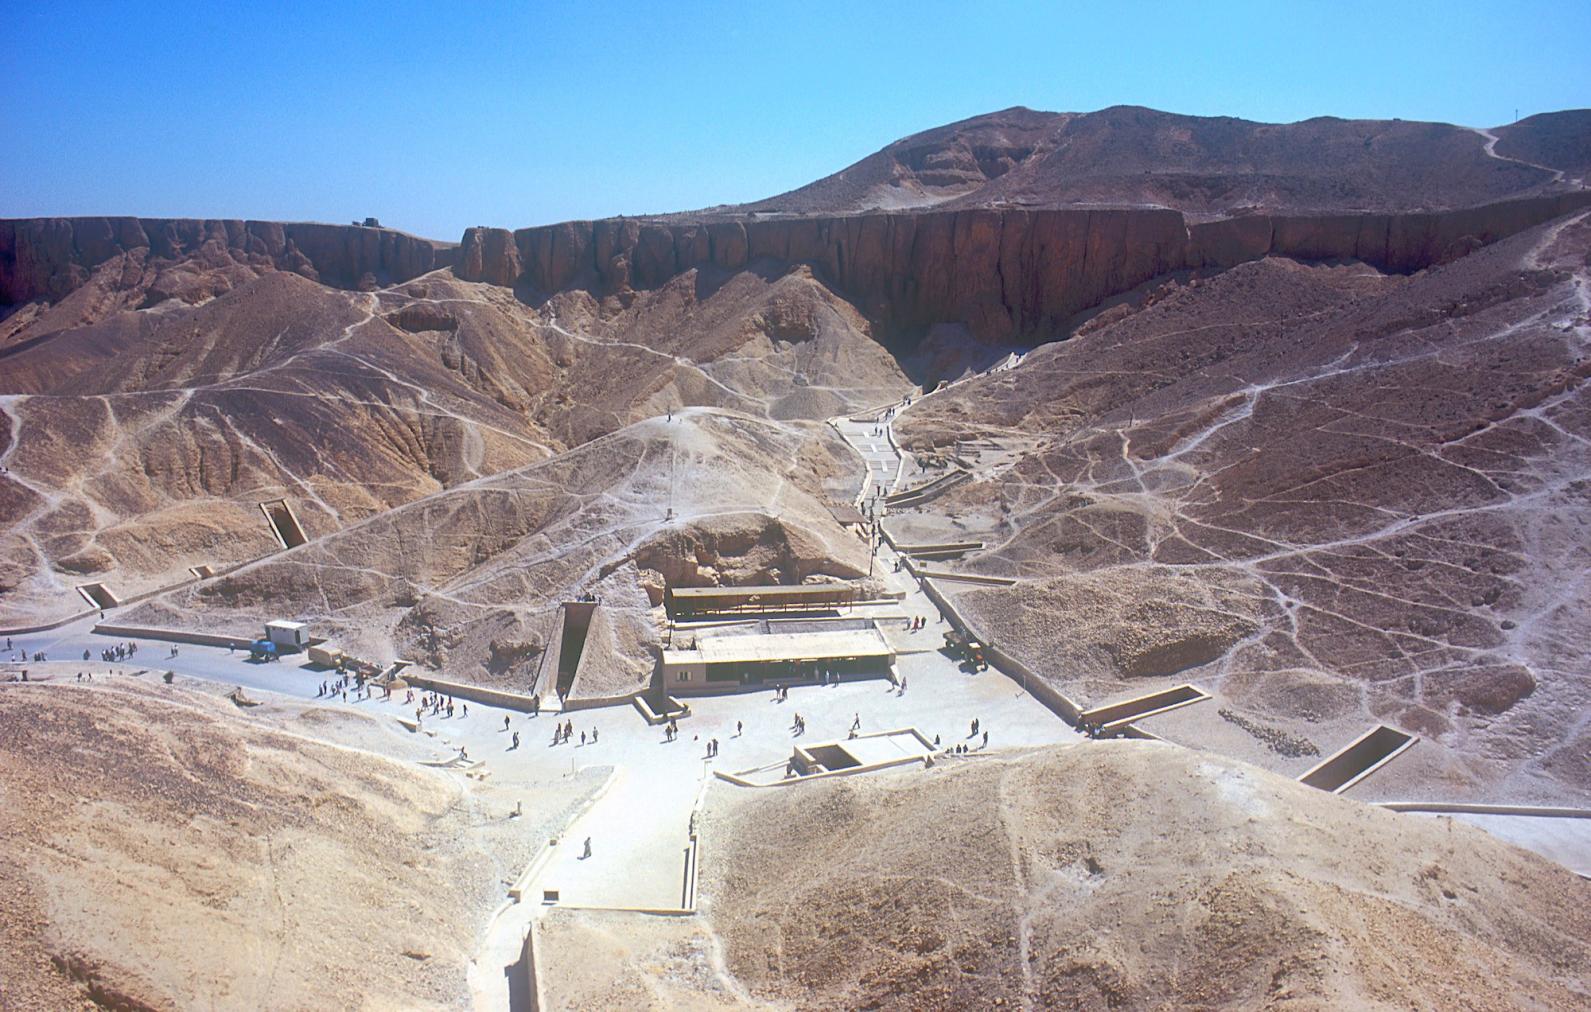 Valley of the Kings, cliff above KV 8, looking east; entrances to KV 03, KV 46, KV 04, KV 05, KV 06, KV 55, KV 62, KV 19, KV 18, KV 17, KV 16, KV 10, KV 11 and tourist shelter.